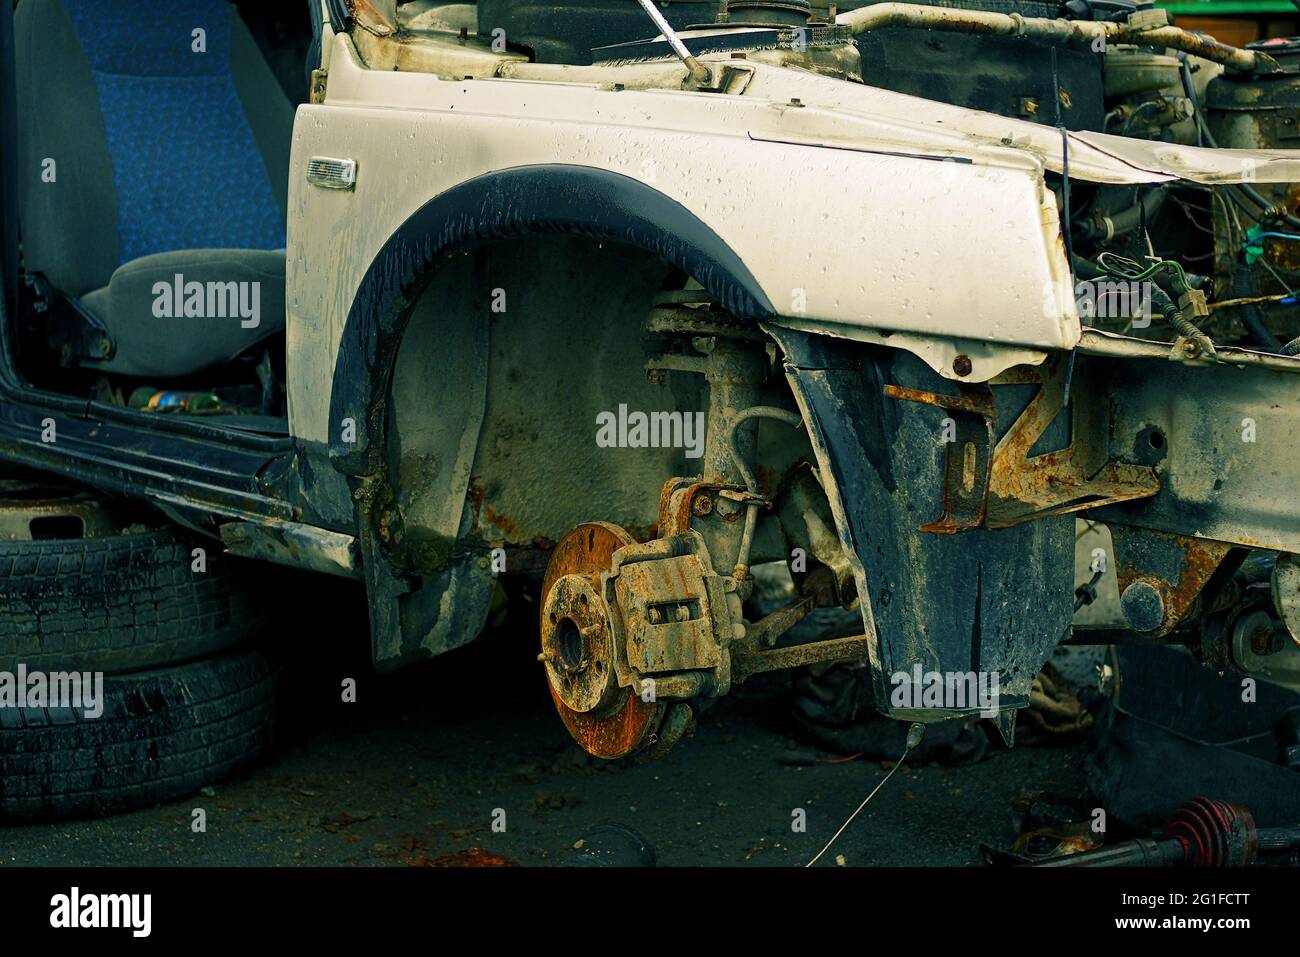 body of old car dismantled for spare parts, color graded Stock Photo